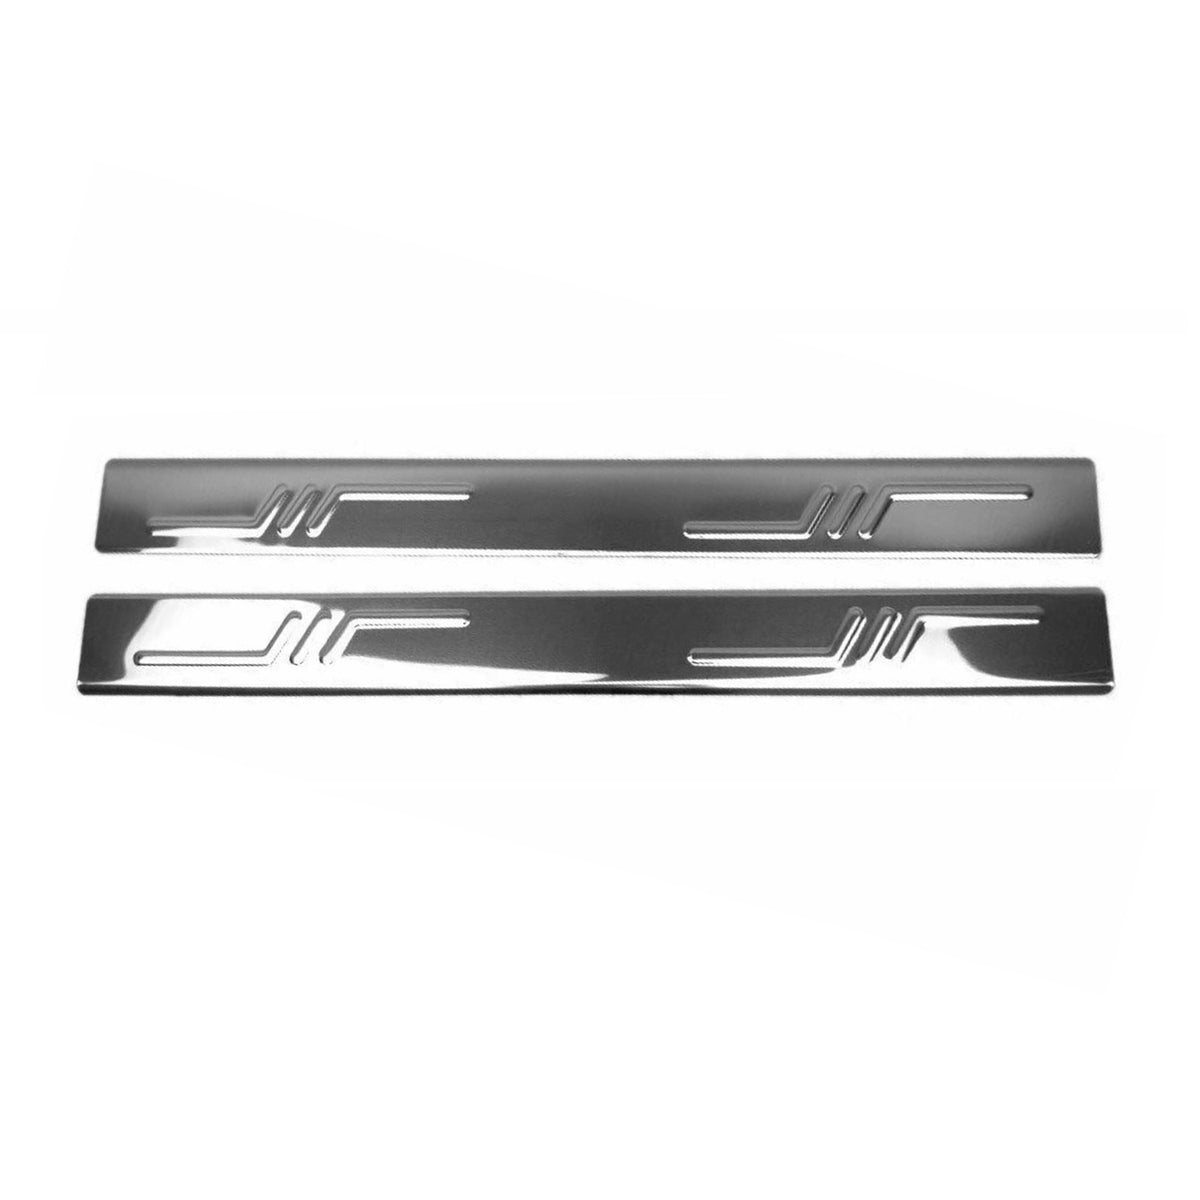 Door sill trims for Alfa Romeo Mito 2008-2018 stainless steel chrome 2x